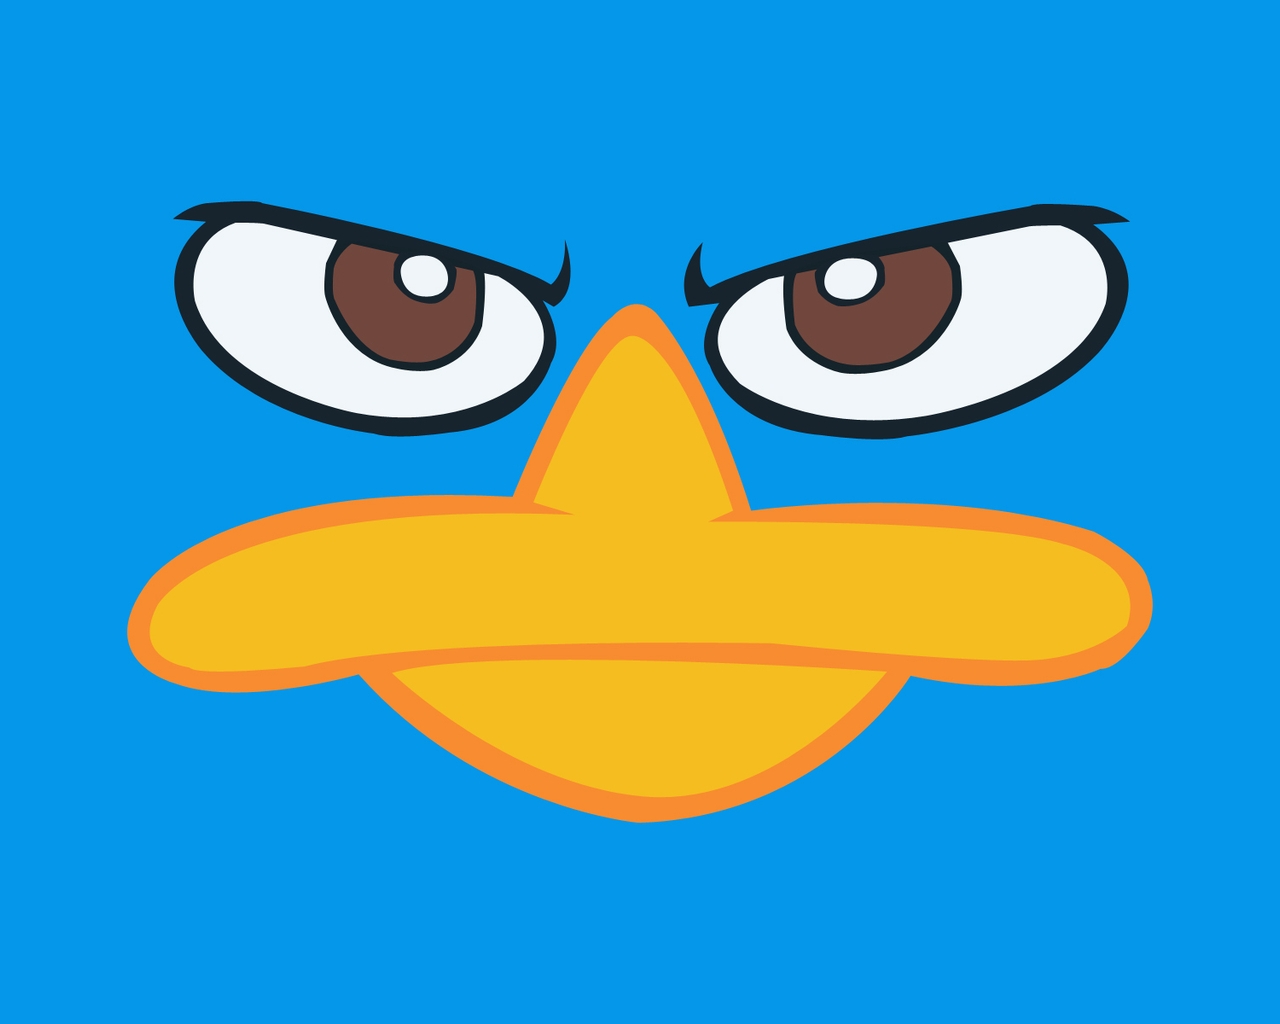 Image: Face, platypus, angry look, blue background